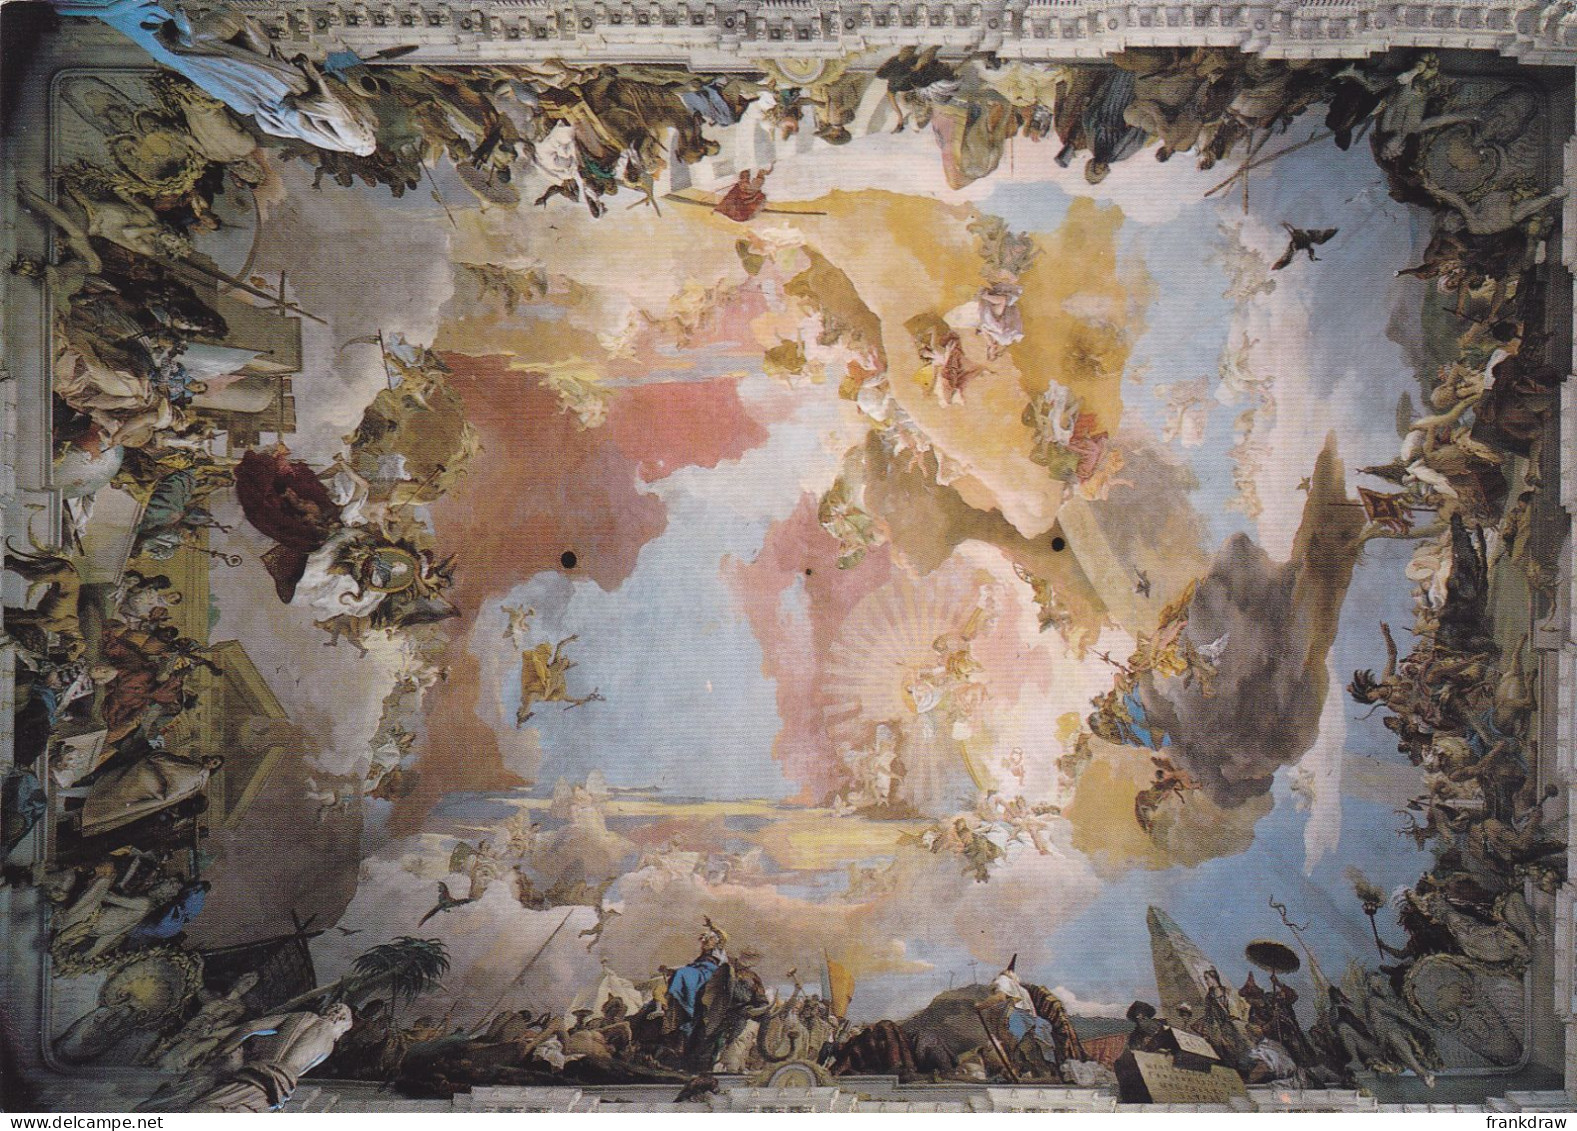 Postcard - Art - G B Tiepolo - Stairway, The Four Continents (Ceiling Fresci) - Card No. 1100 - VG - Non Classificati